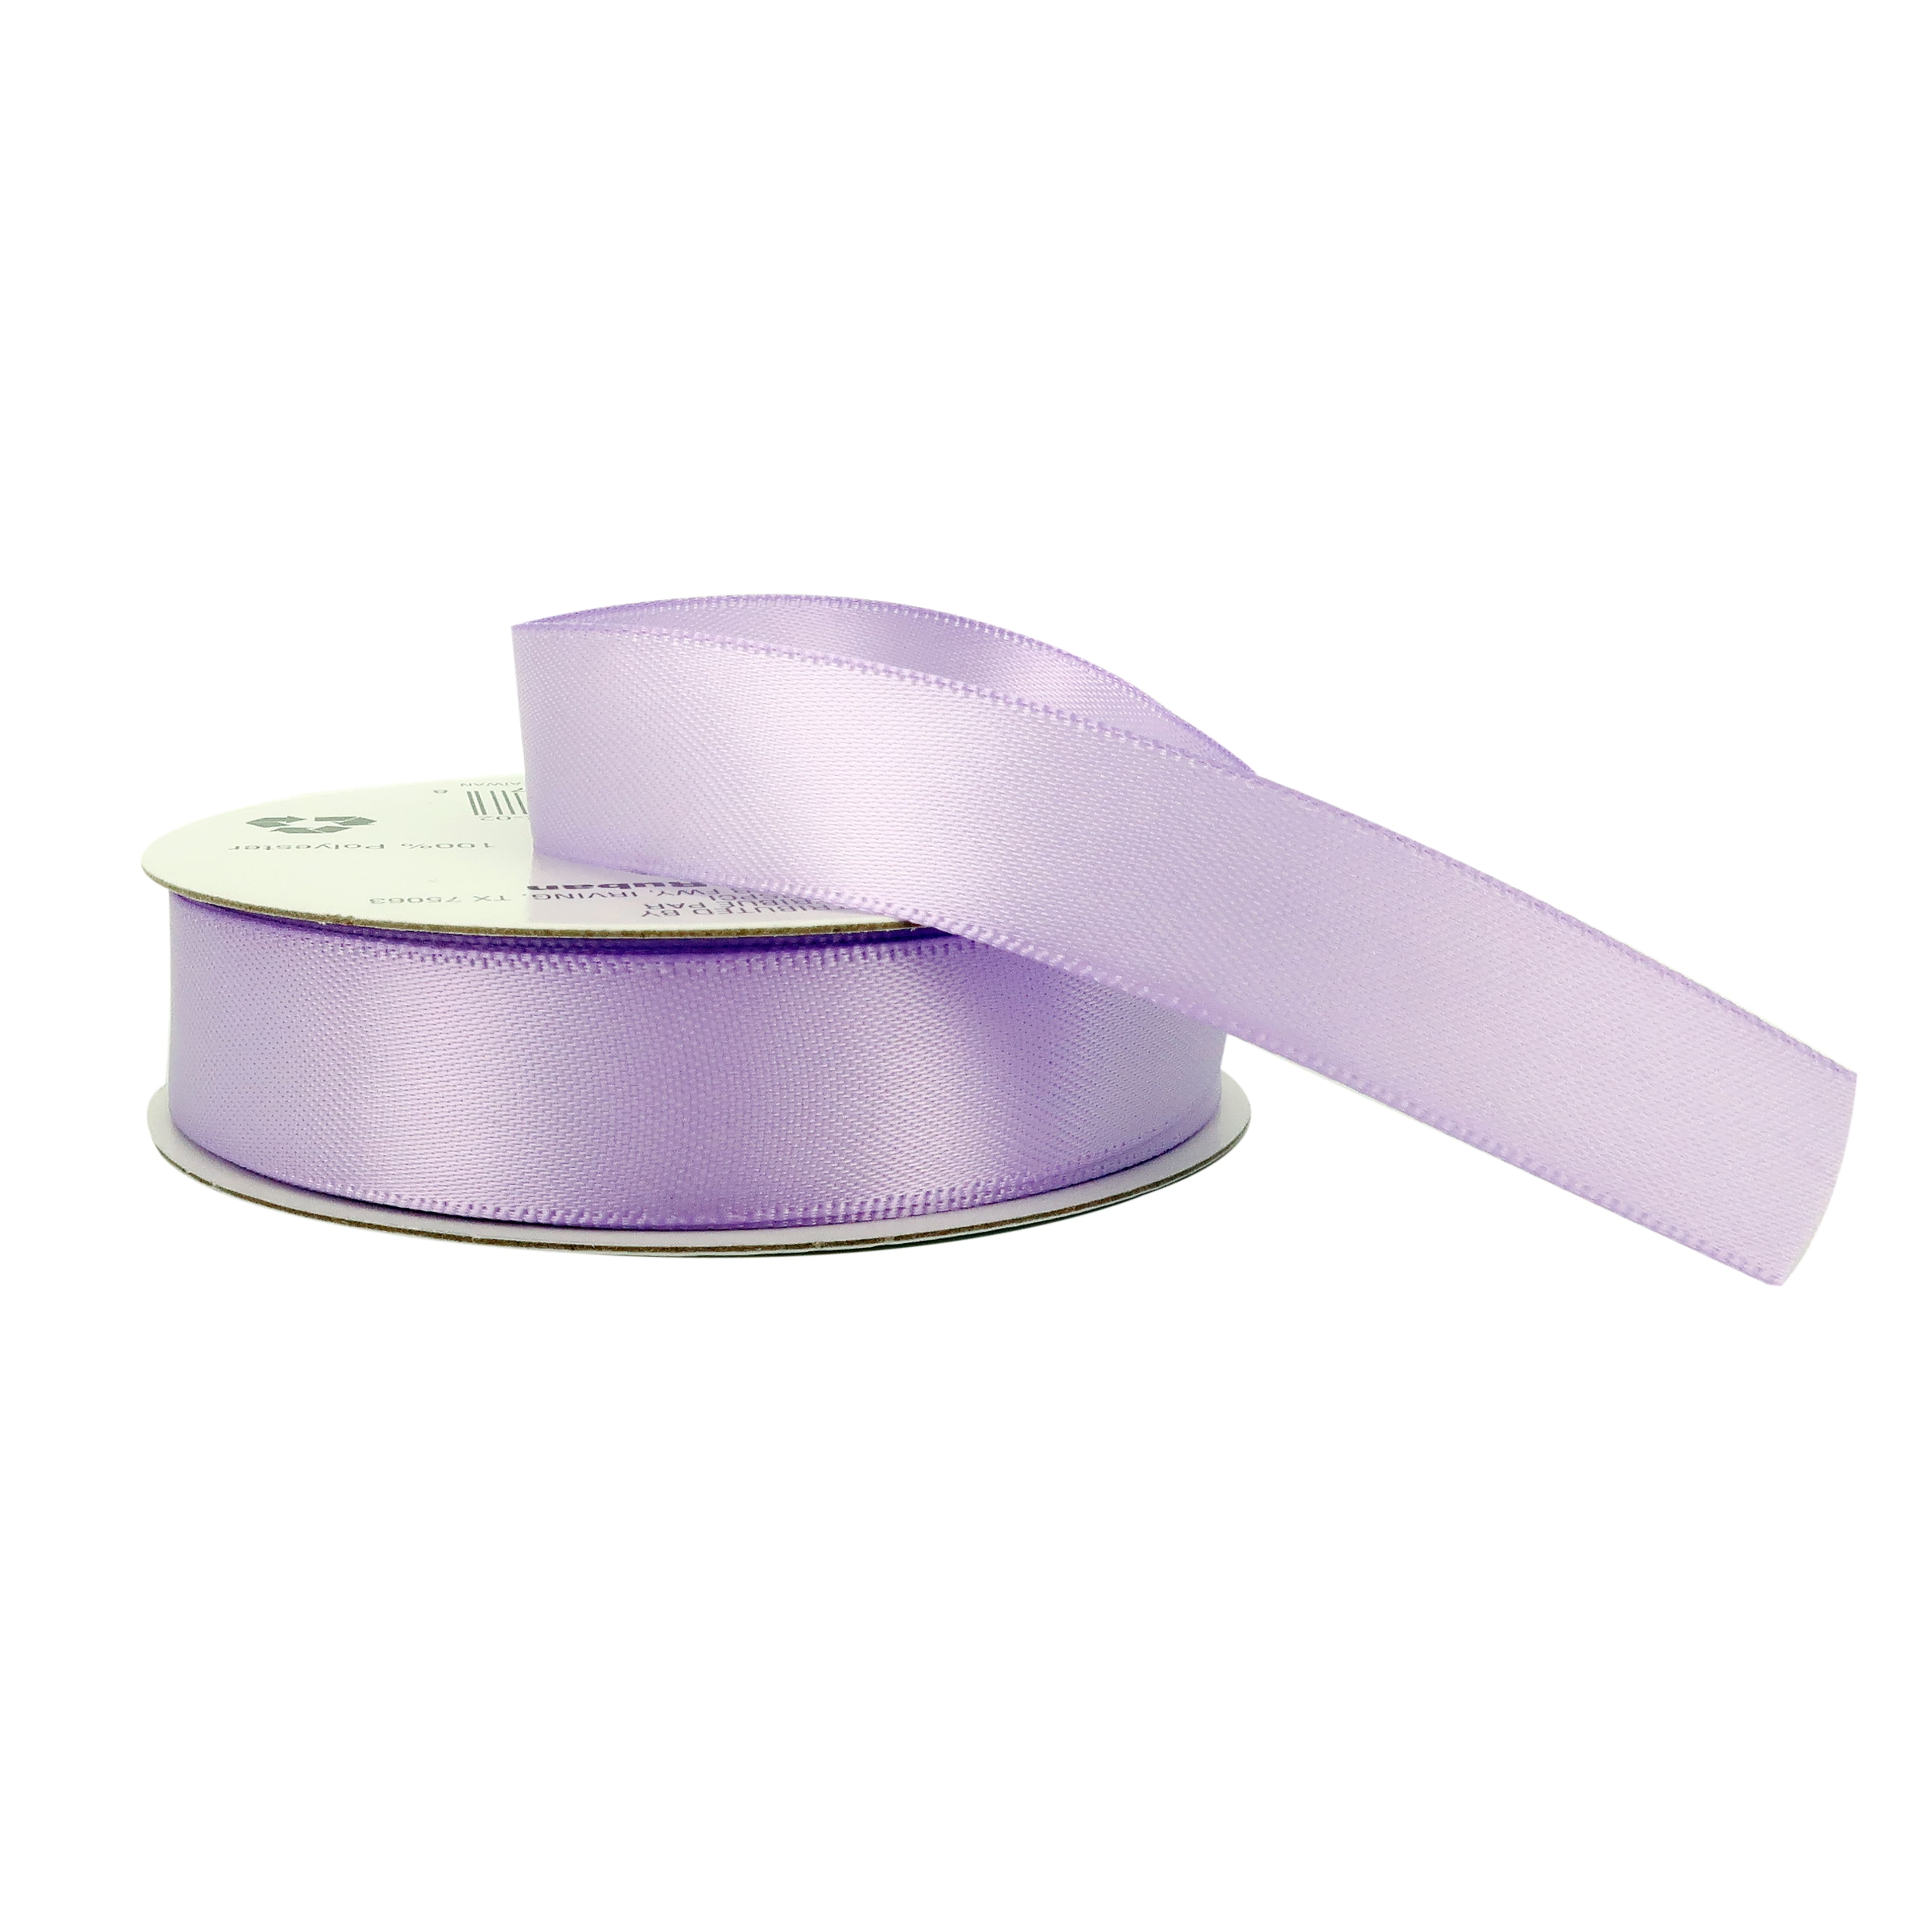 Double Faced Satin Ribbon Pink 1/8